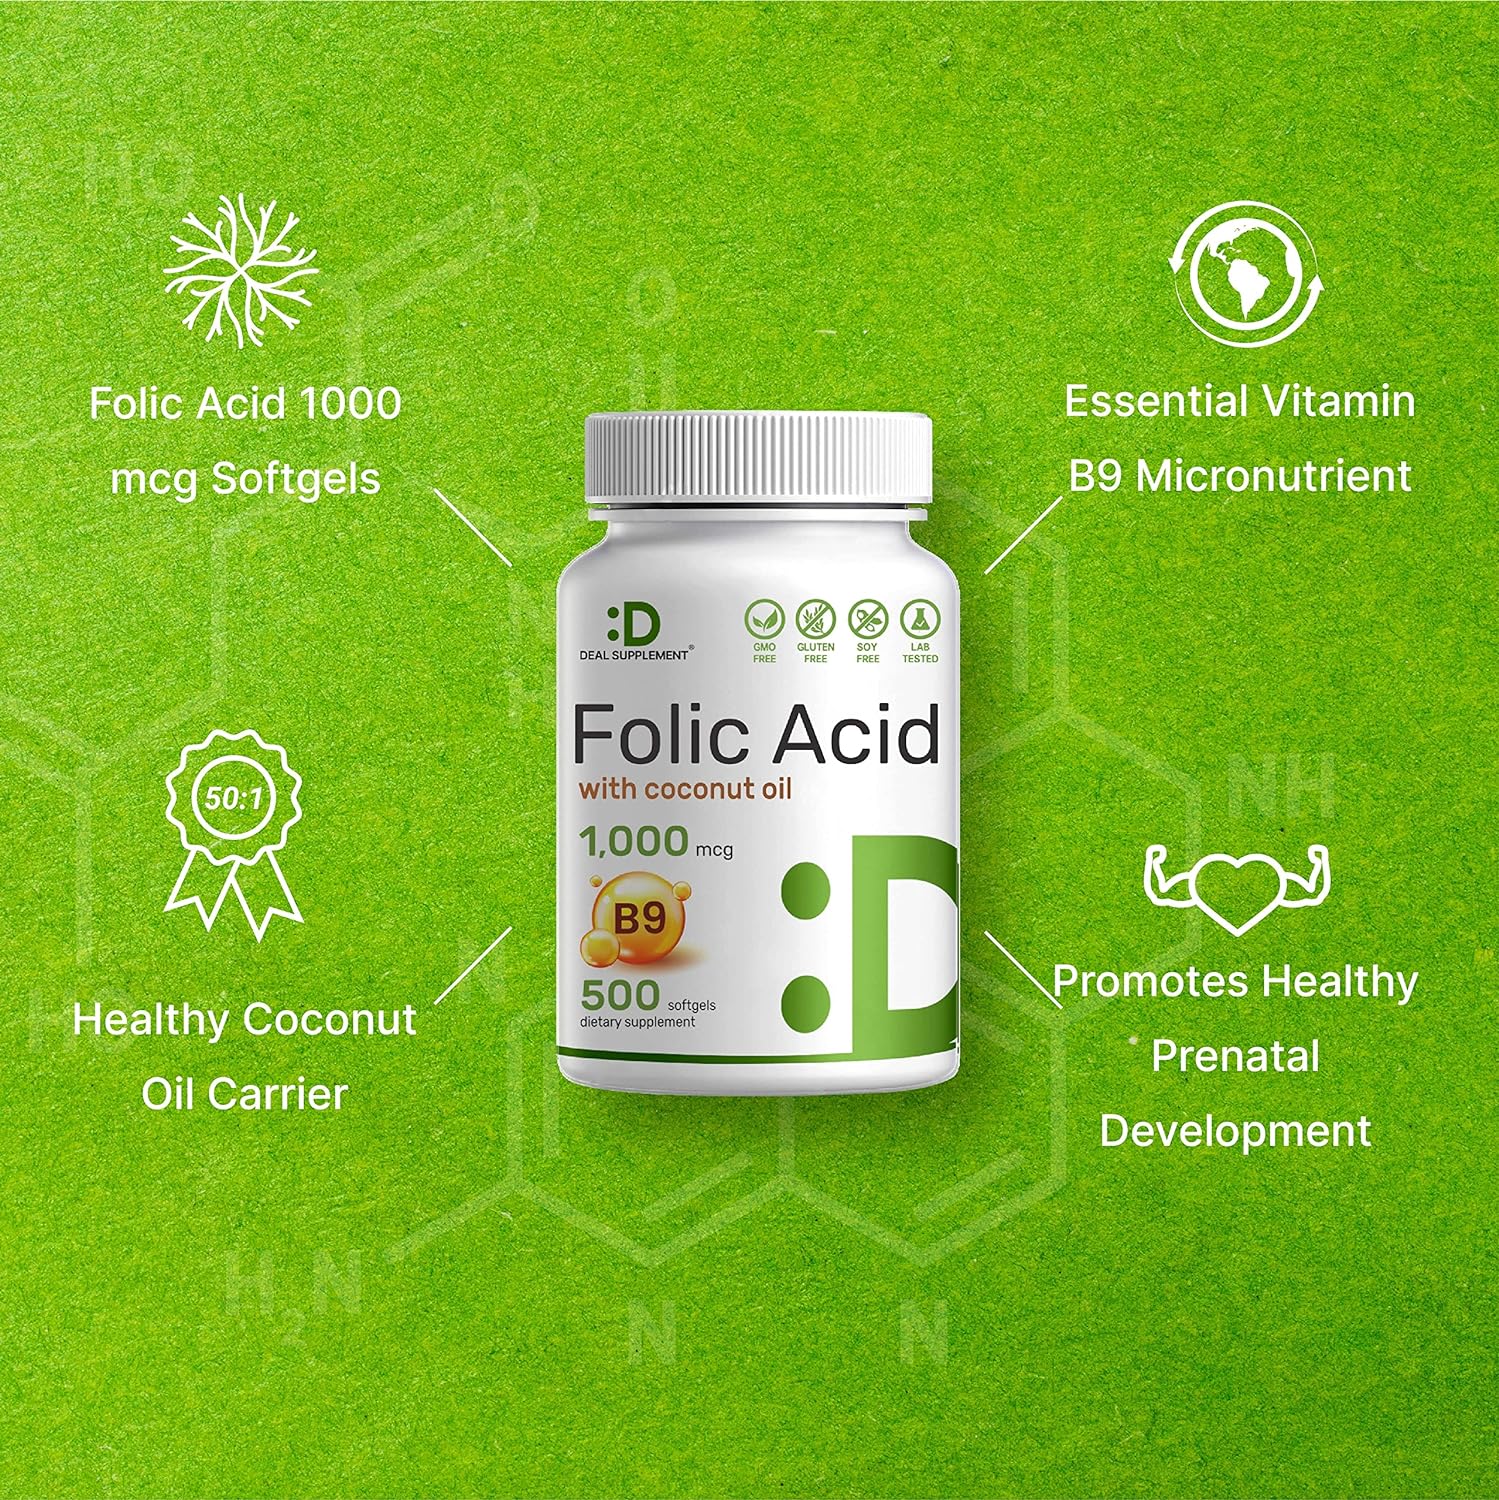 L Methylfolate 15mg Per Serving, 240 Veggie Capsules – Active Folic Acid Form (5-MTHF), Bioavailable Methylated Folate – Prenatal, Energy,  Brain Support Supplement – Non-GMO